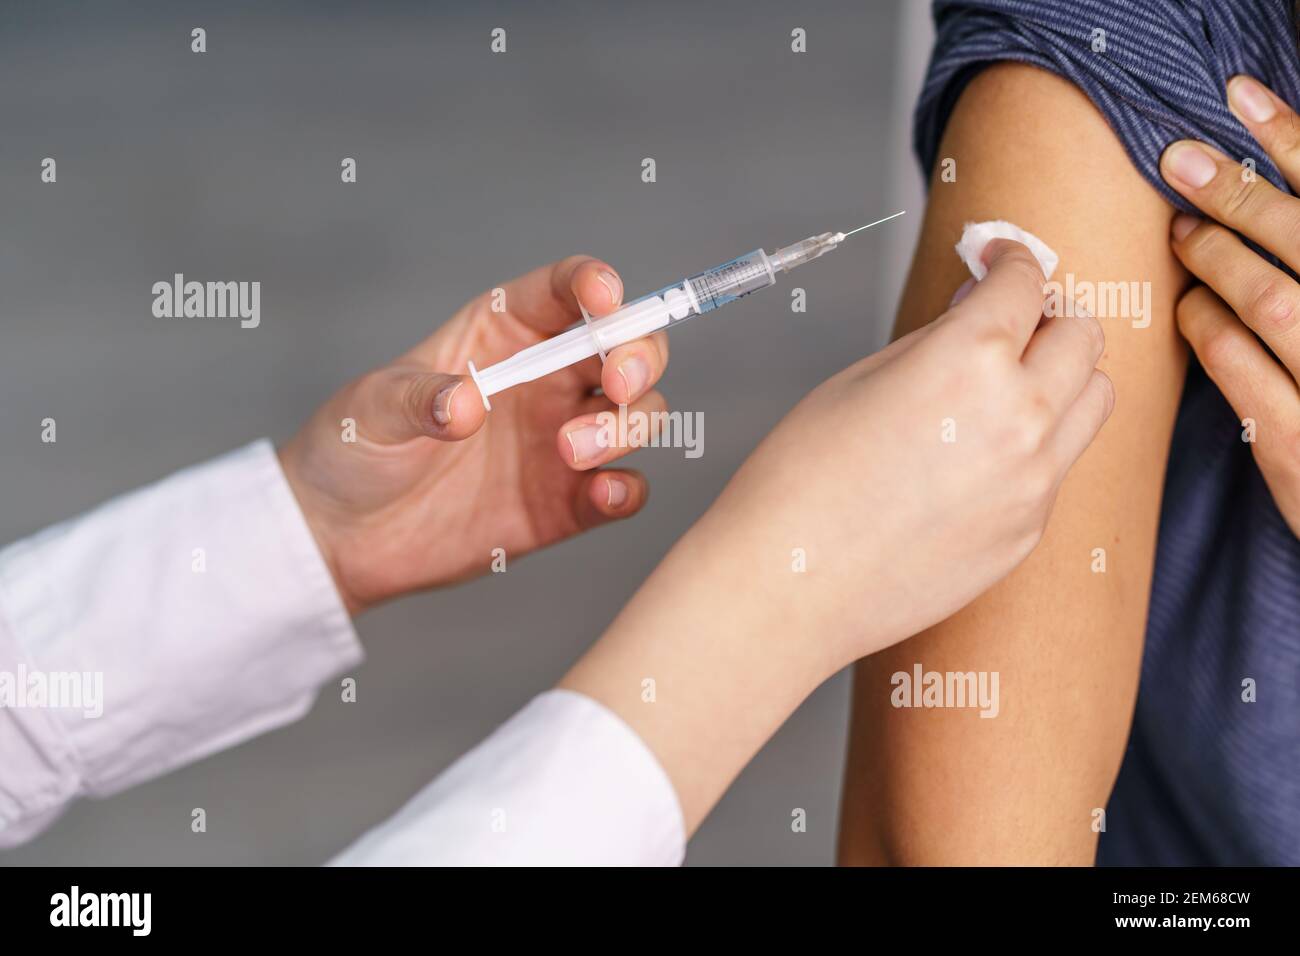 Vaccination healthcare concept - Hands of doctor or nurse hold a syringe and ampule preparing a shot of corona virus covid-19 hpv or flu vaccine for u Stock Photo